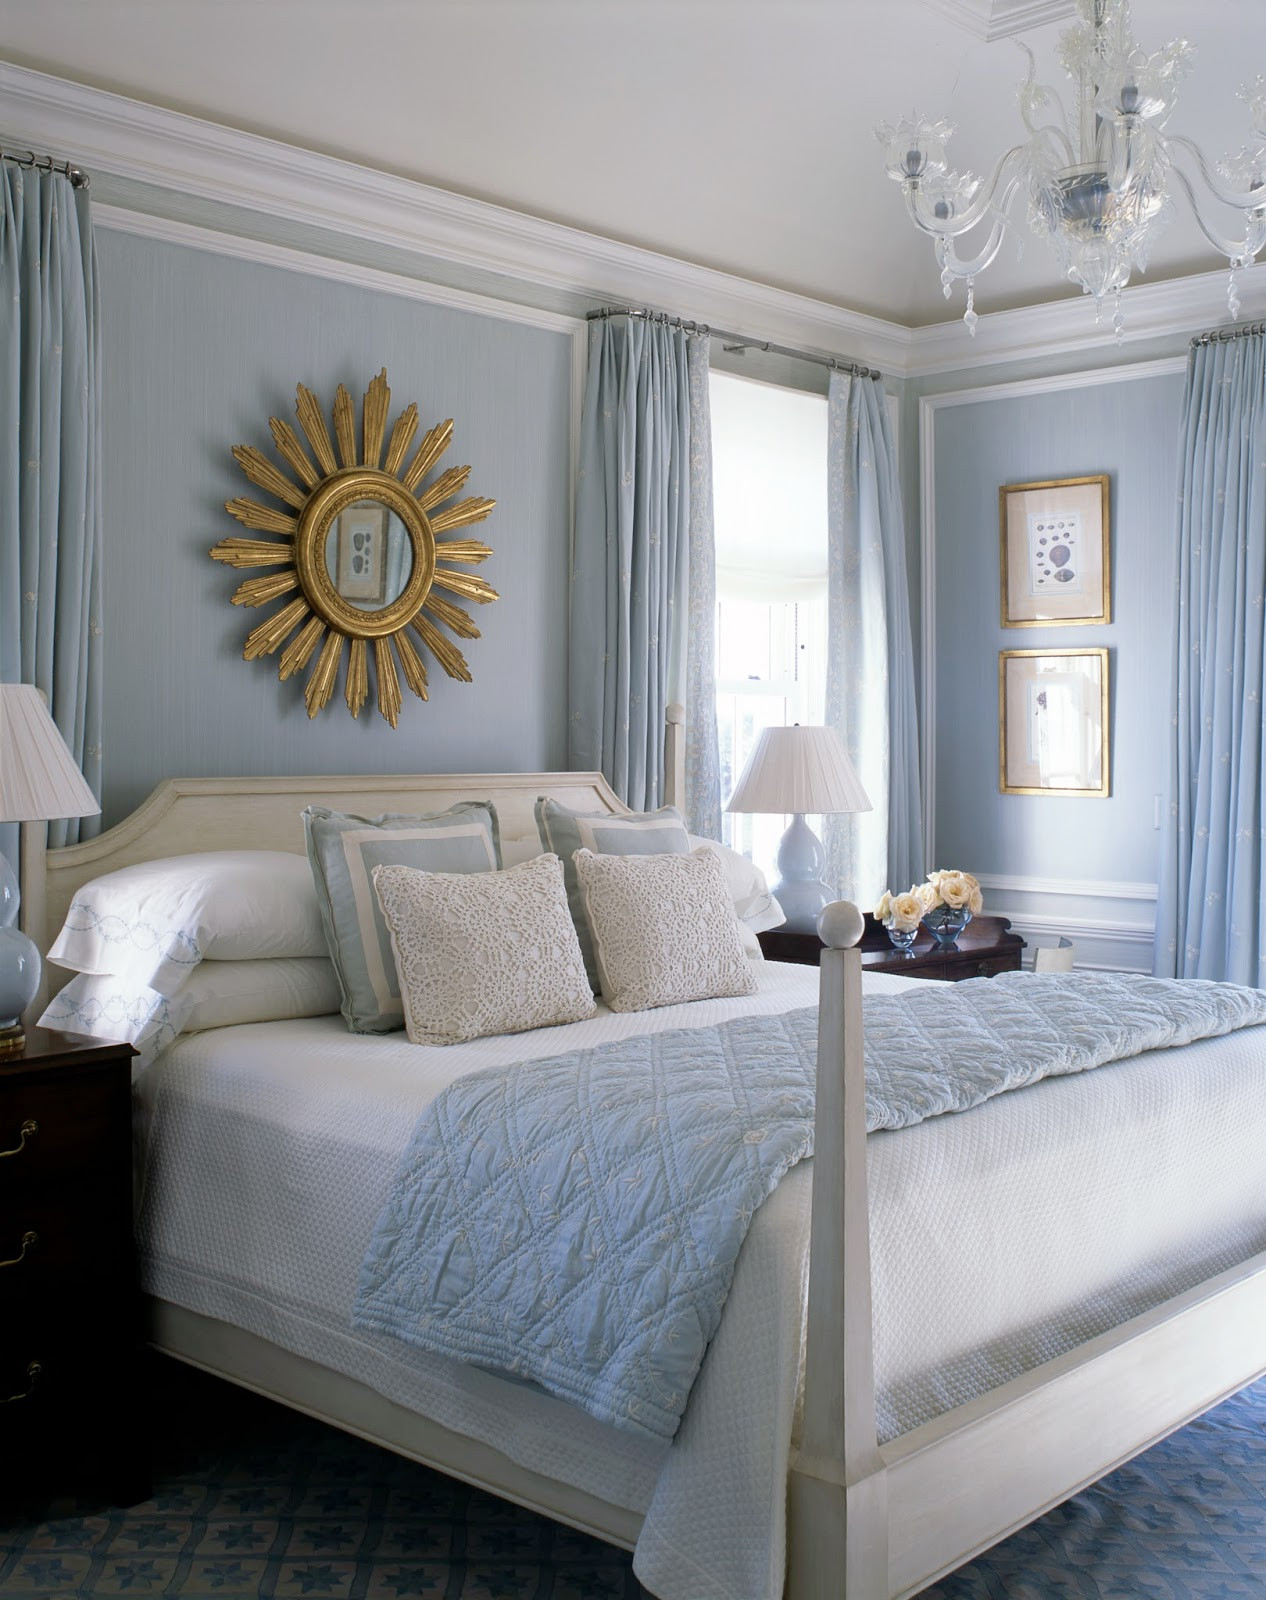 Baby Blue Room Decor
 A Blue and White Beach House by Phoebe and Jim Howard